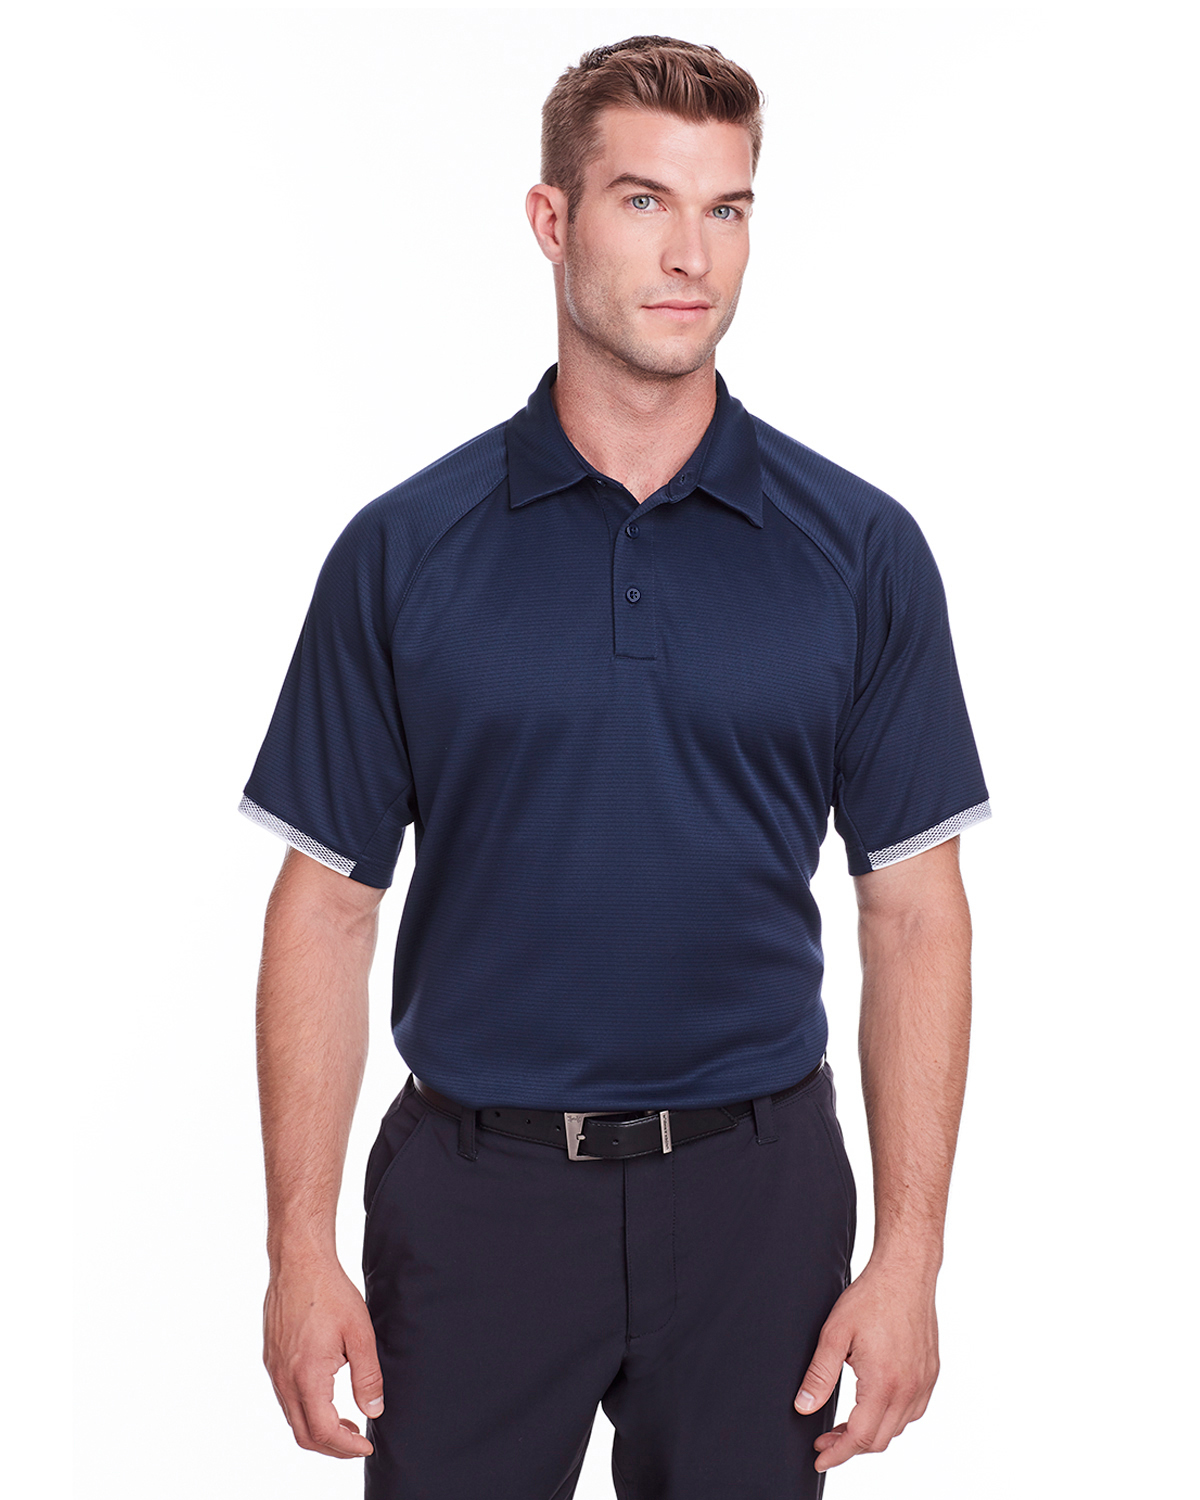 Under Armour Mens Corporate Rival Polo